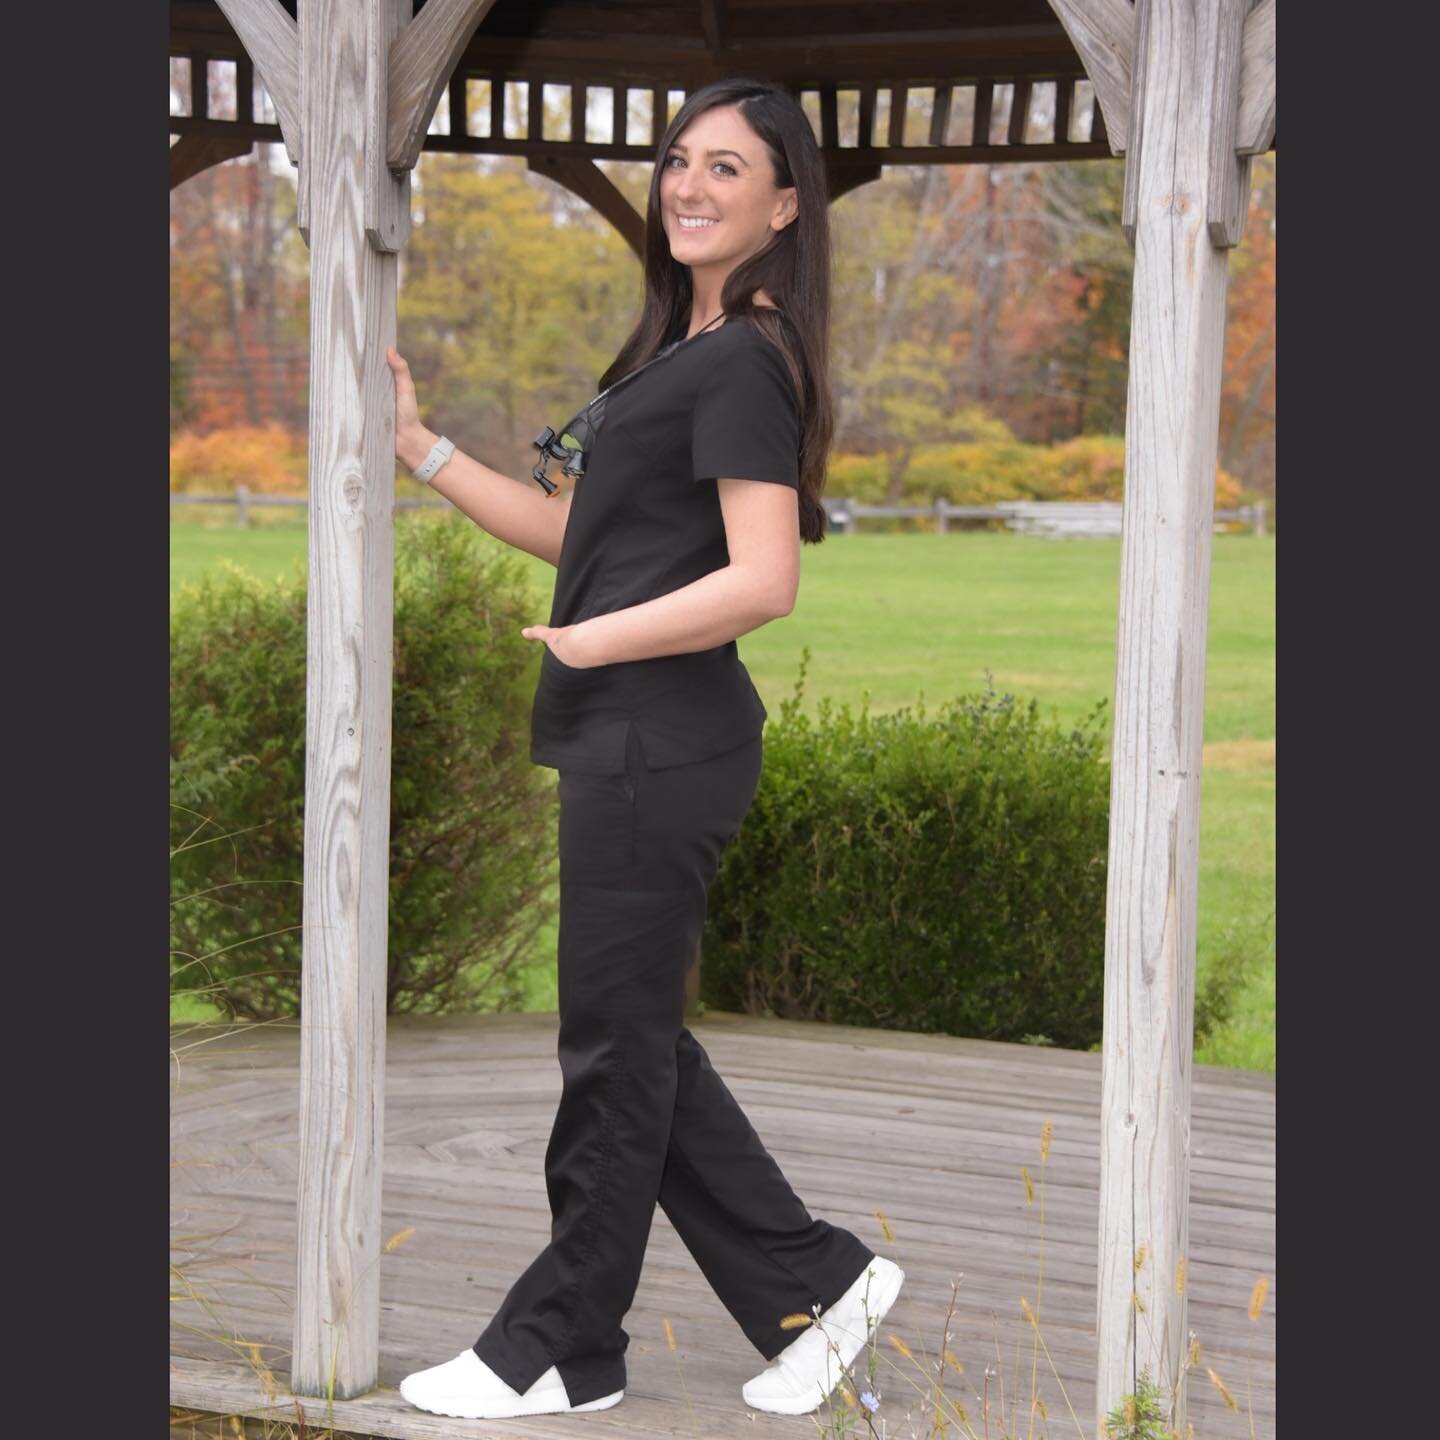 Happy Monday! Petite and Tall sizes available now for our Degraw set! ⁣
⁣
⁣
⁣
⁣
⁣
⁣
#medicalassistant #physician #physicianassistant #doctorlife #ornurse #anesthesiologist #nurseanesthetist #dentist #surgeon #ernurse